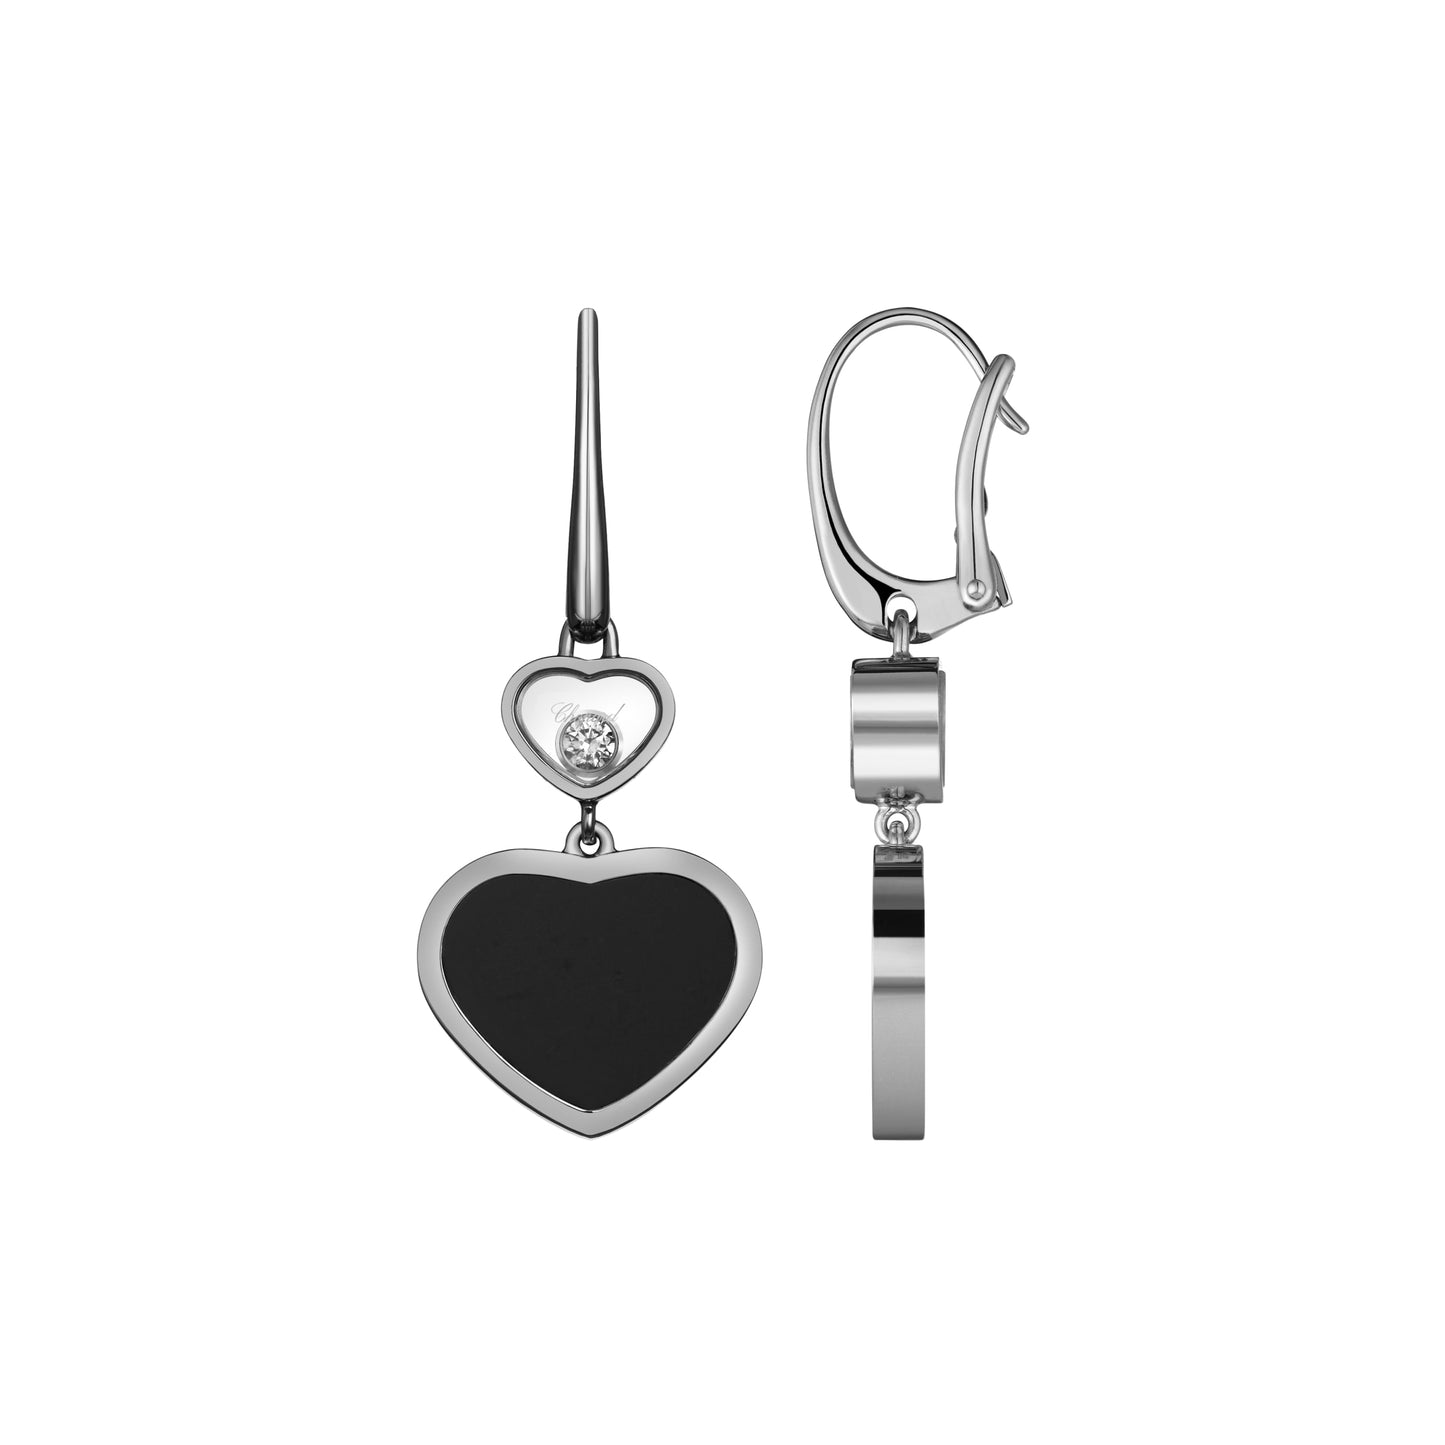 HAPPY HEARTS EARRINGS, ETHICAL WHITE GOLD, DIAMONDS, ONYX 837482-1210